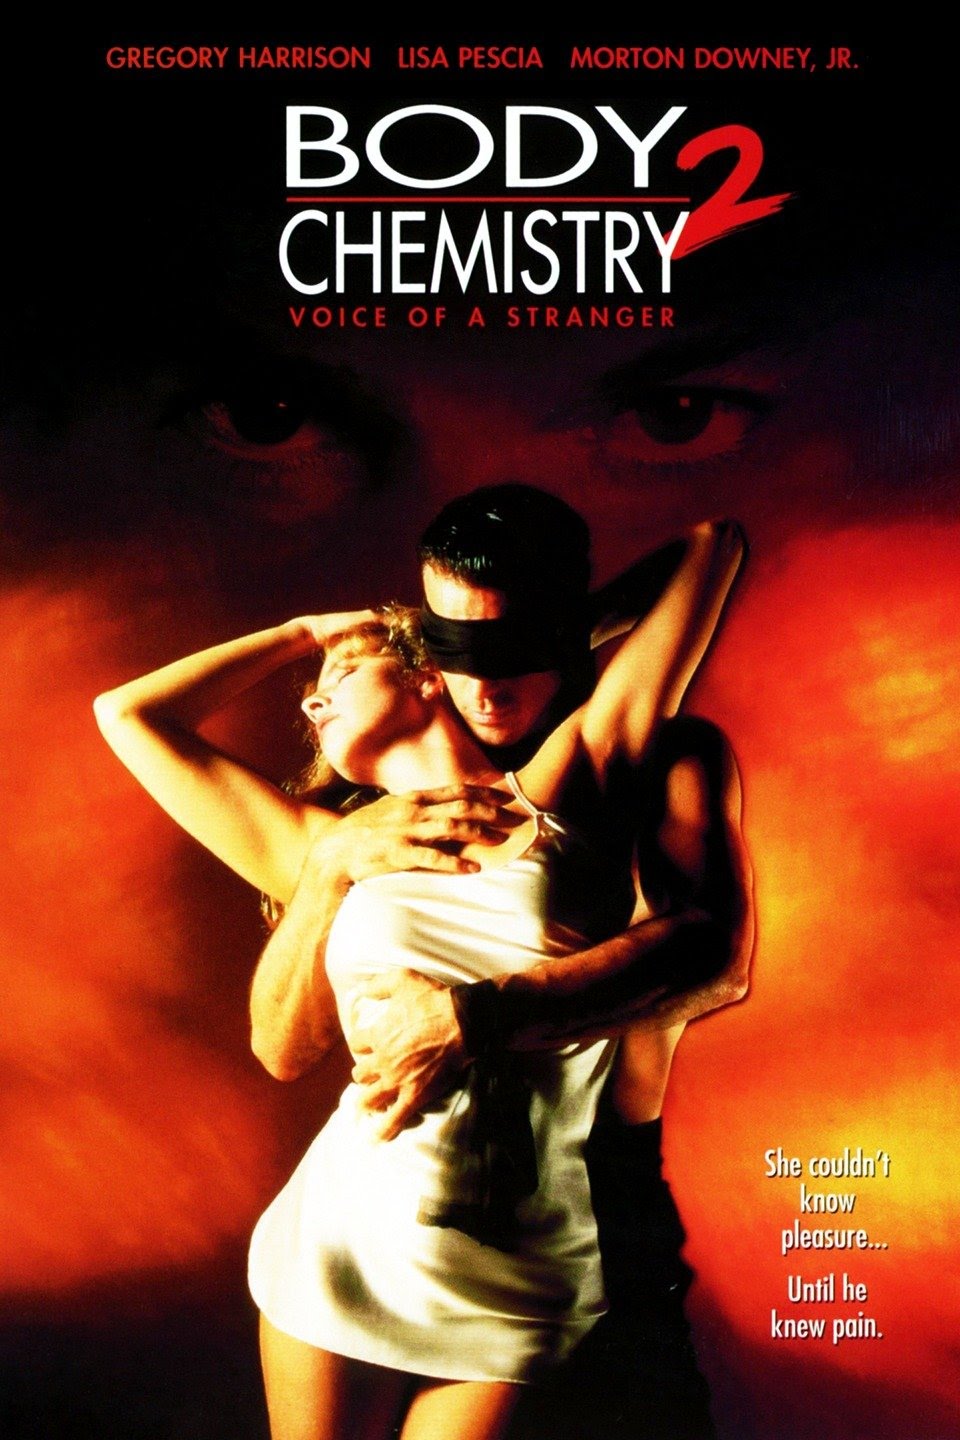 Download Body Chemistry 2 (1991) UNRATED DVDRip [In English] Erotic Movie 720p